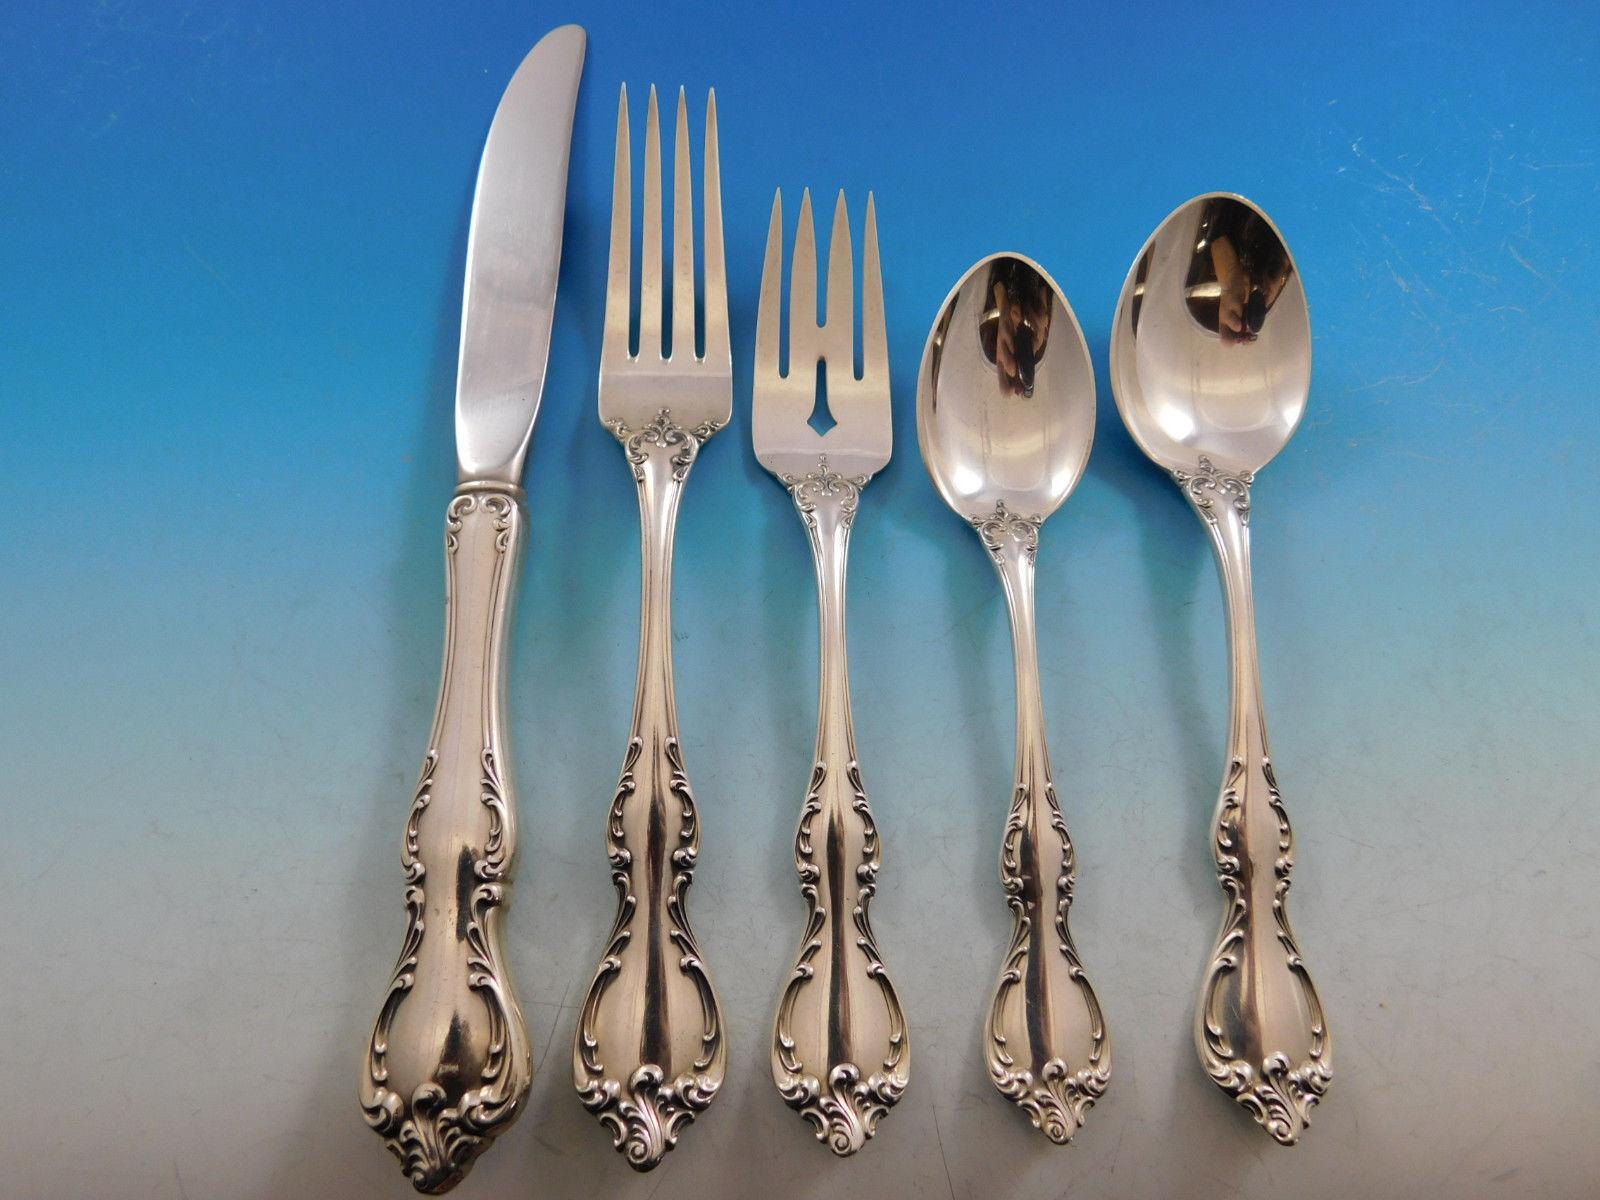 Debussy by Towle sterling silver Flatware set, 66 pieces. This set includes:

12 knives, 9